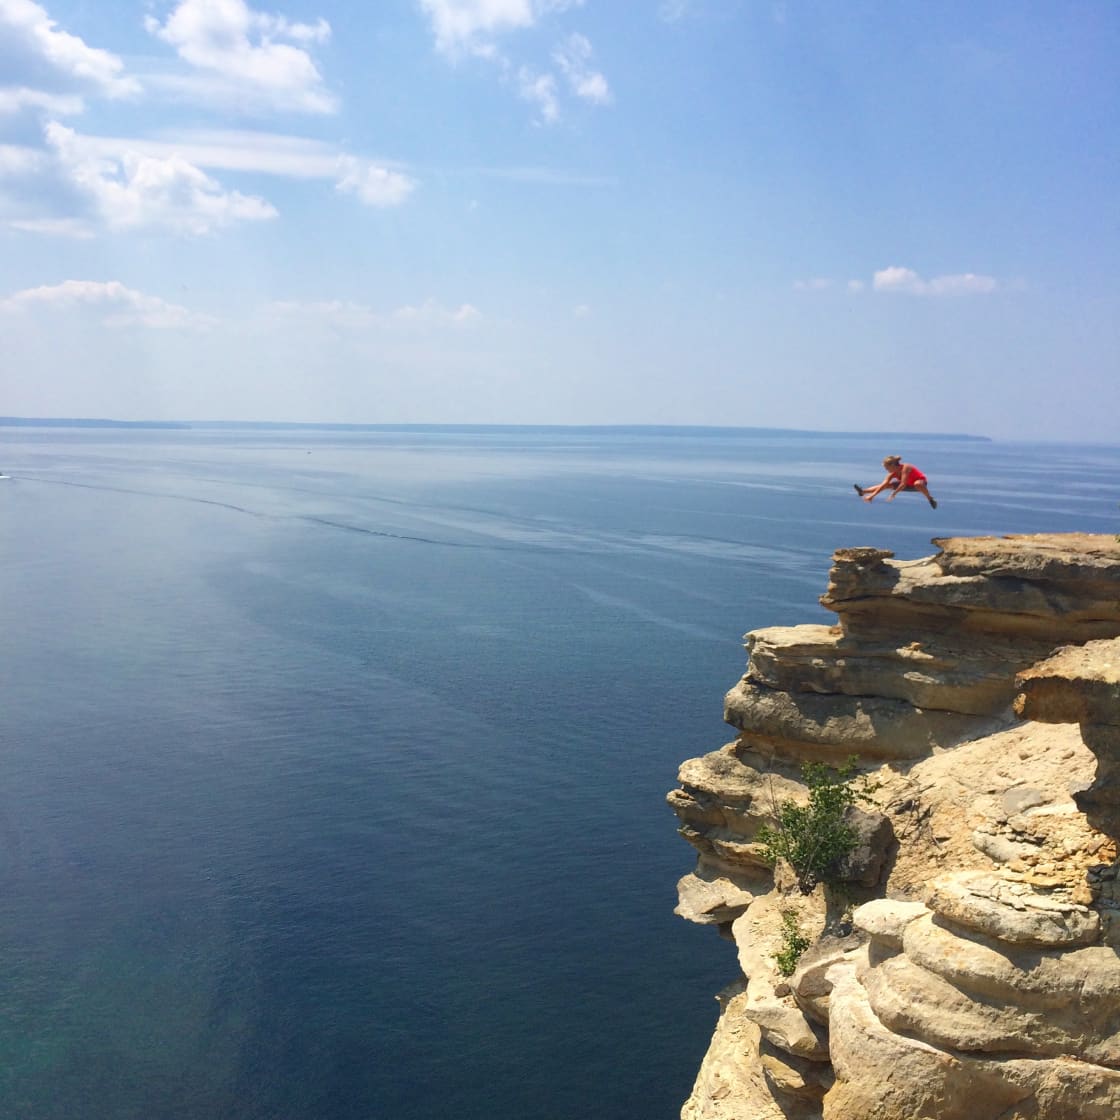 Putting my karate skills to use on some cliffs along Pictured Rocks 